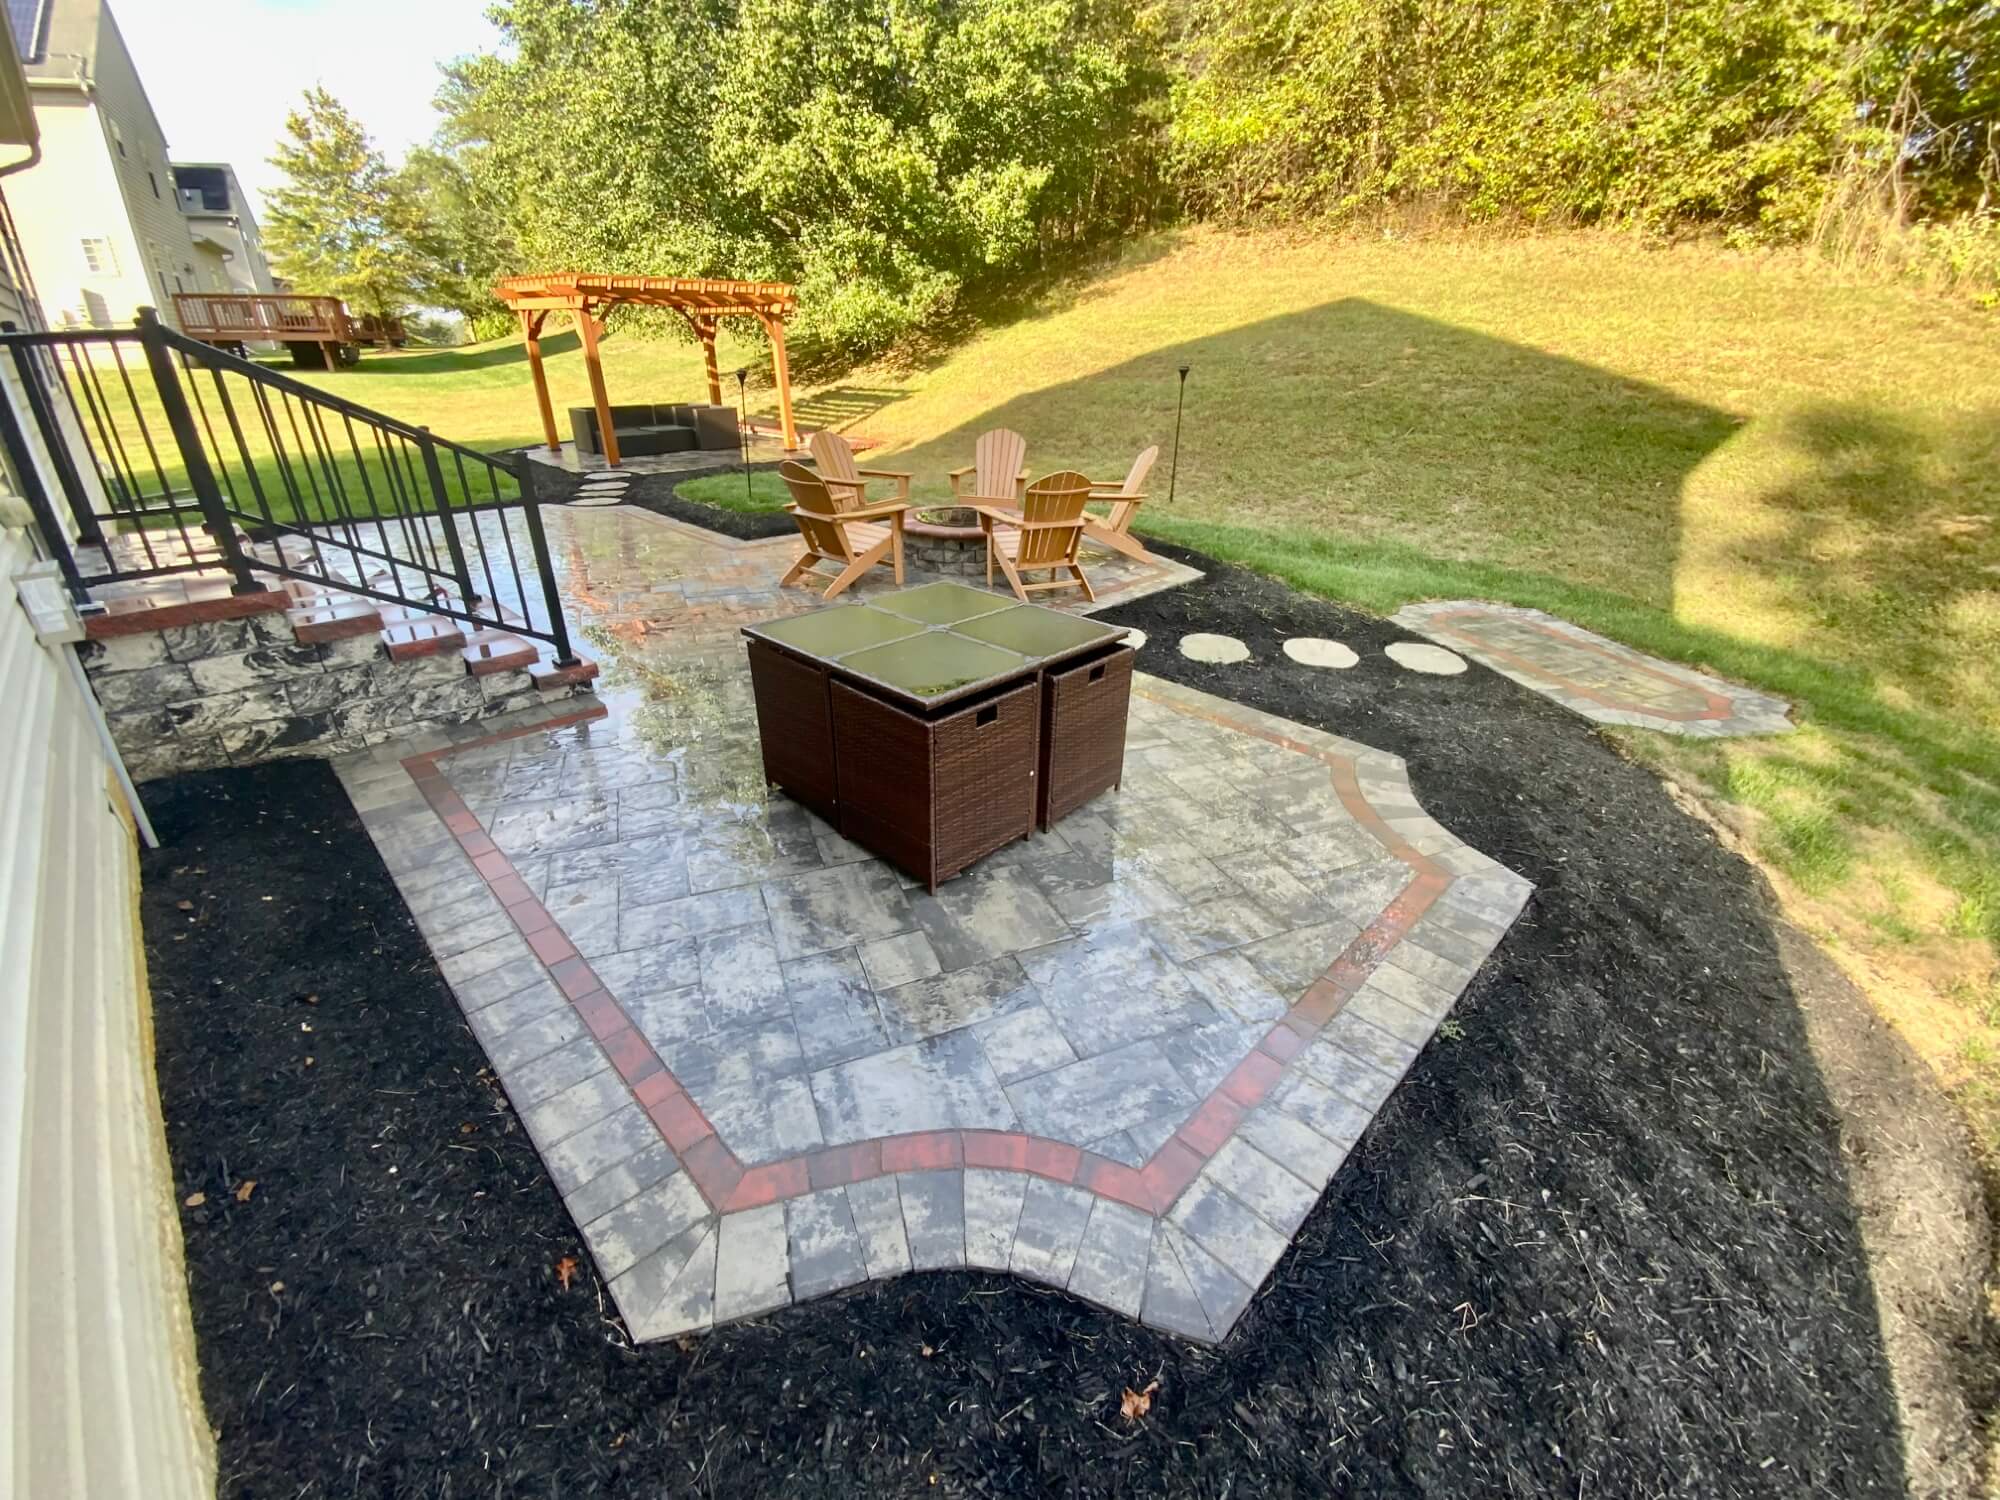 New Paver Patio in Brandywine, Maryland